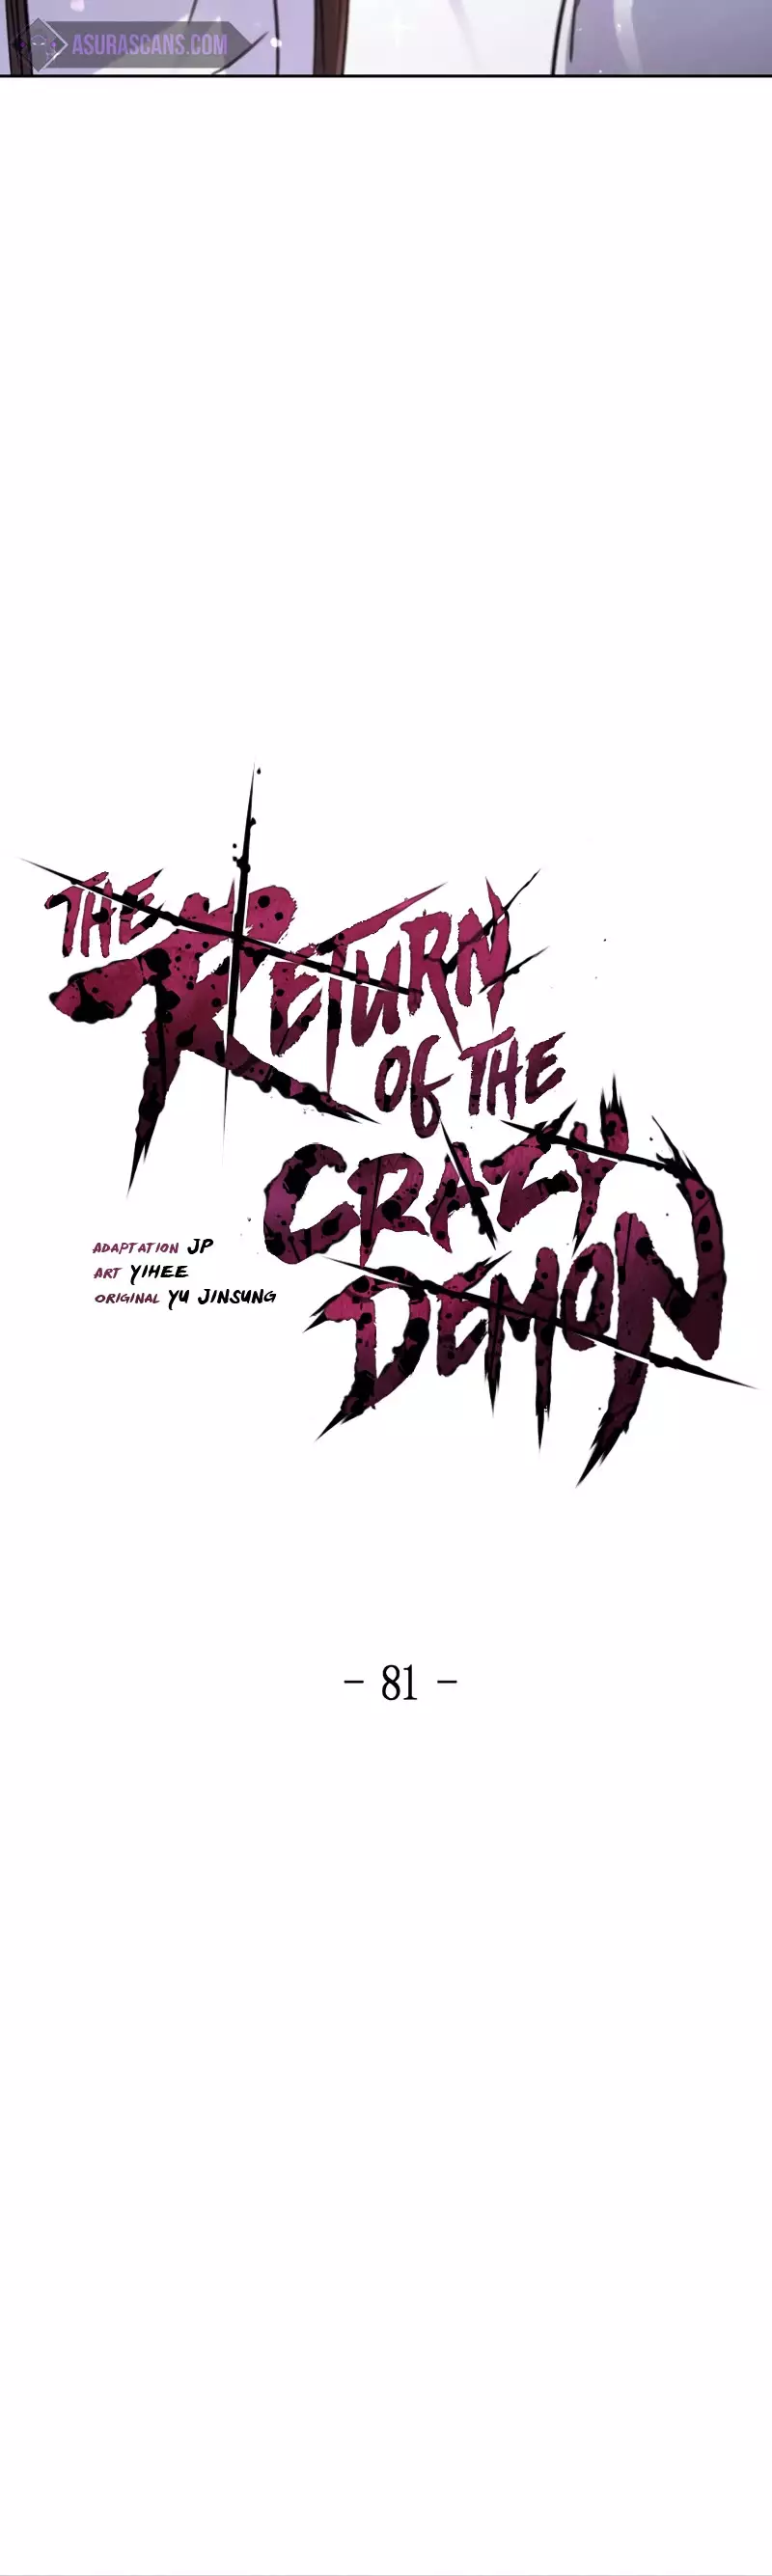 The Return Of The Crazy Demon - 81 page 11-895d5d7a